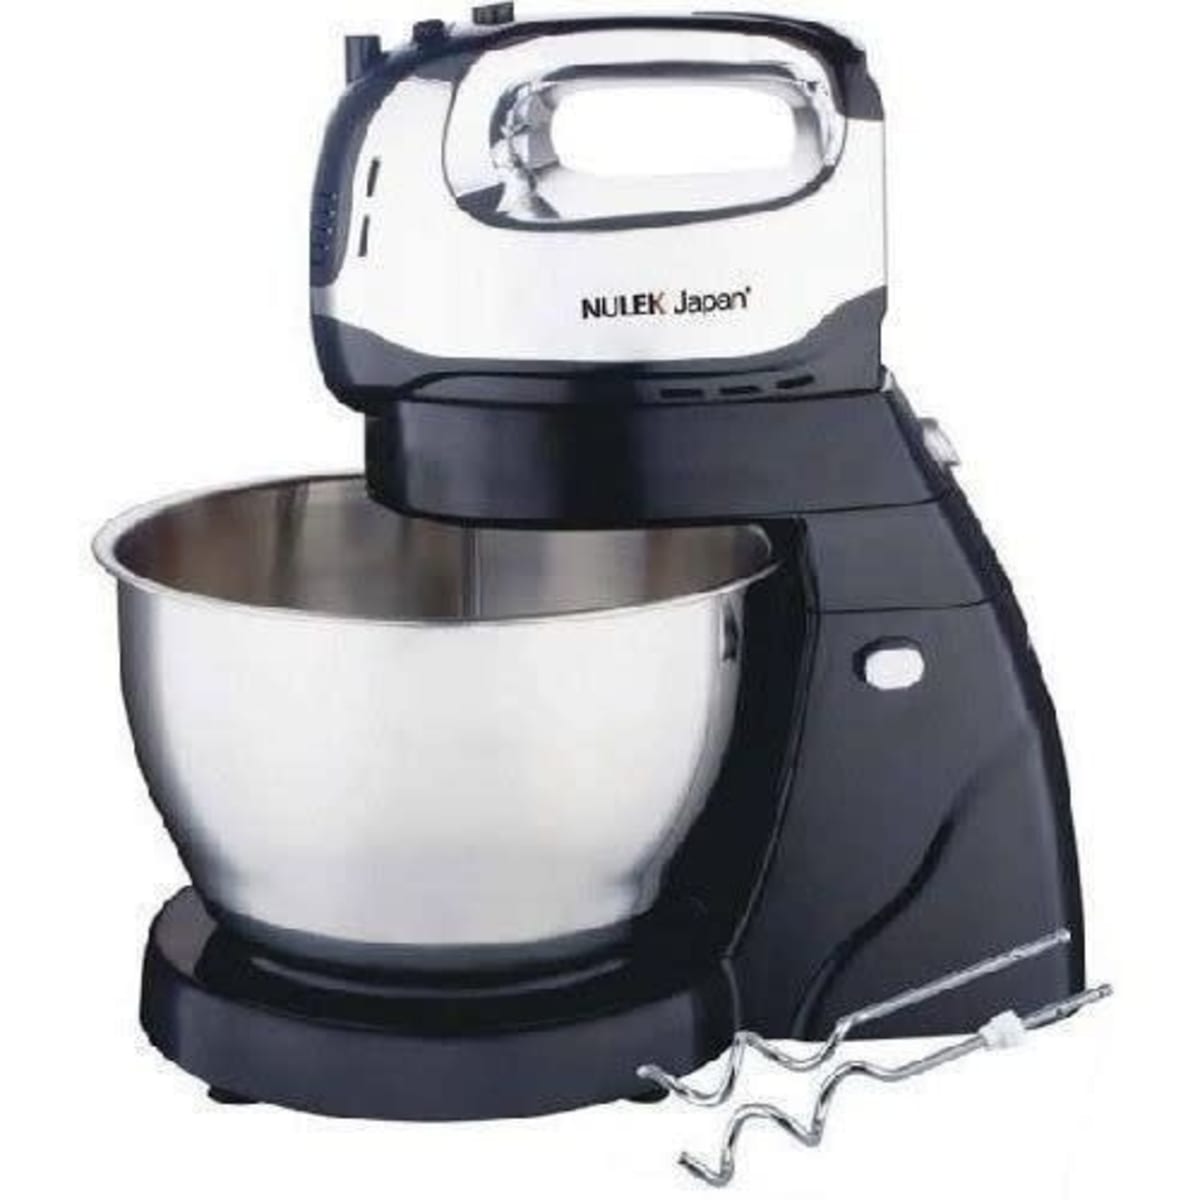 Cake Mixer Machine 5L in Lekki - Electrical Equipment, De Young Investment  Co.